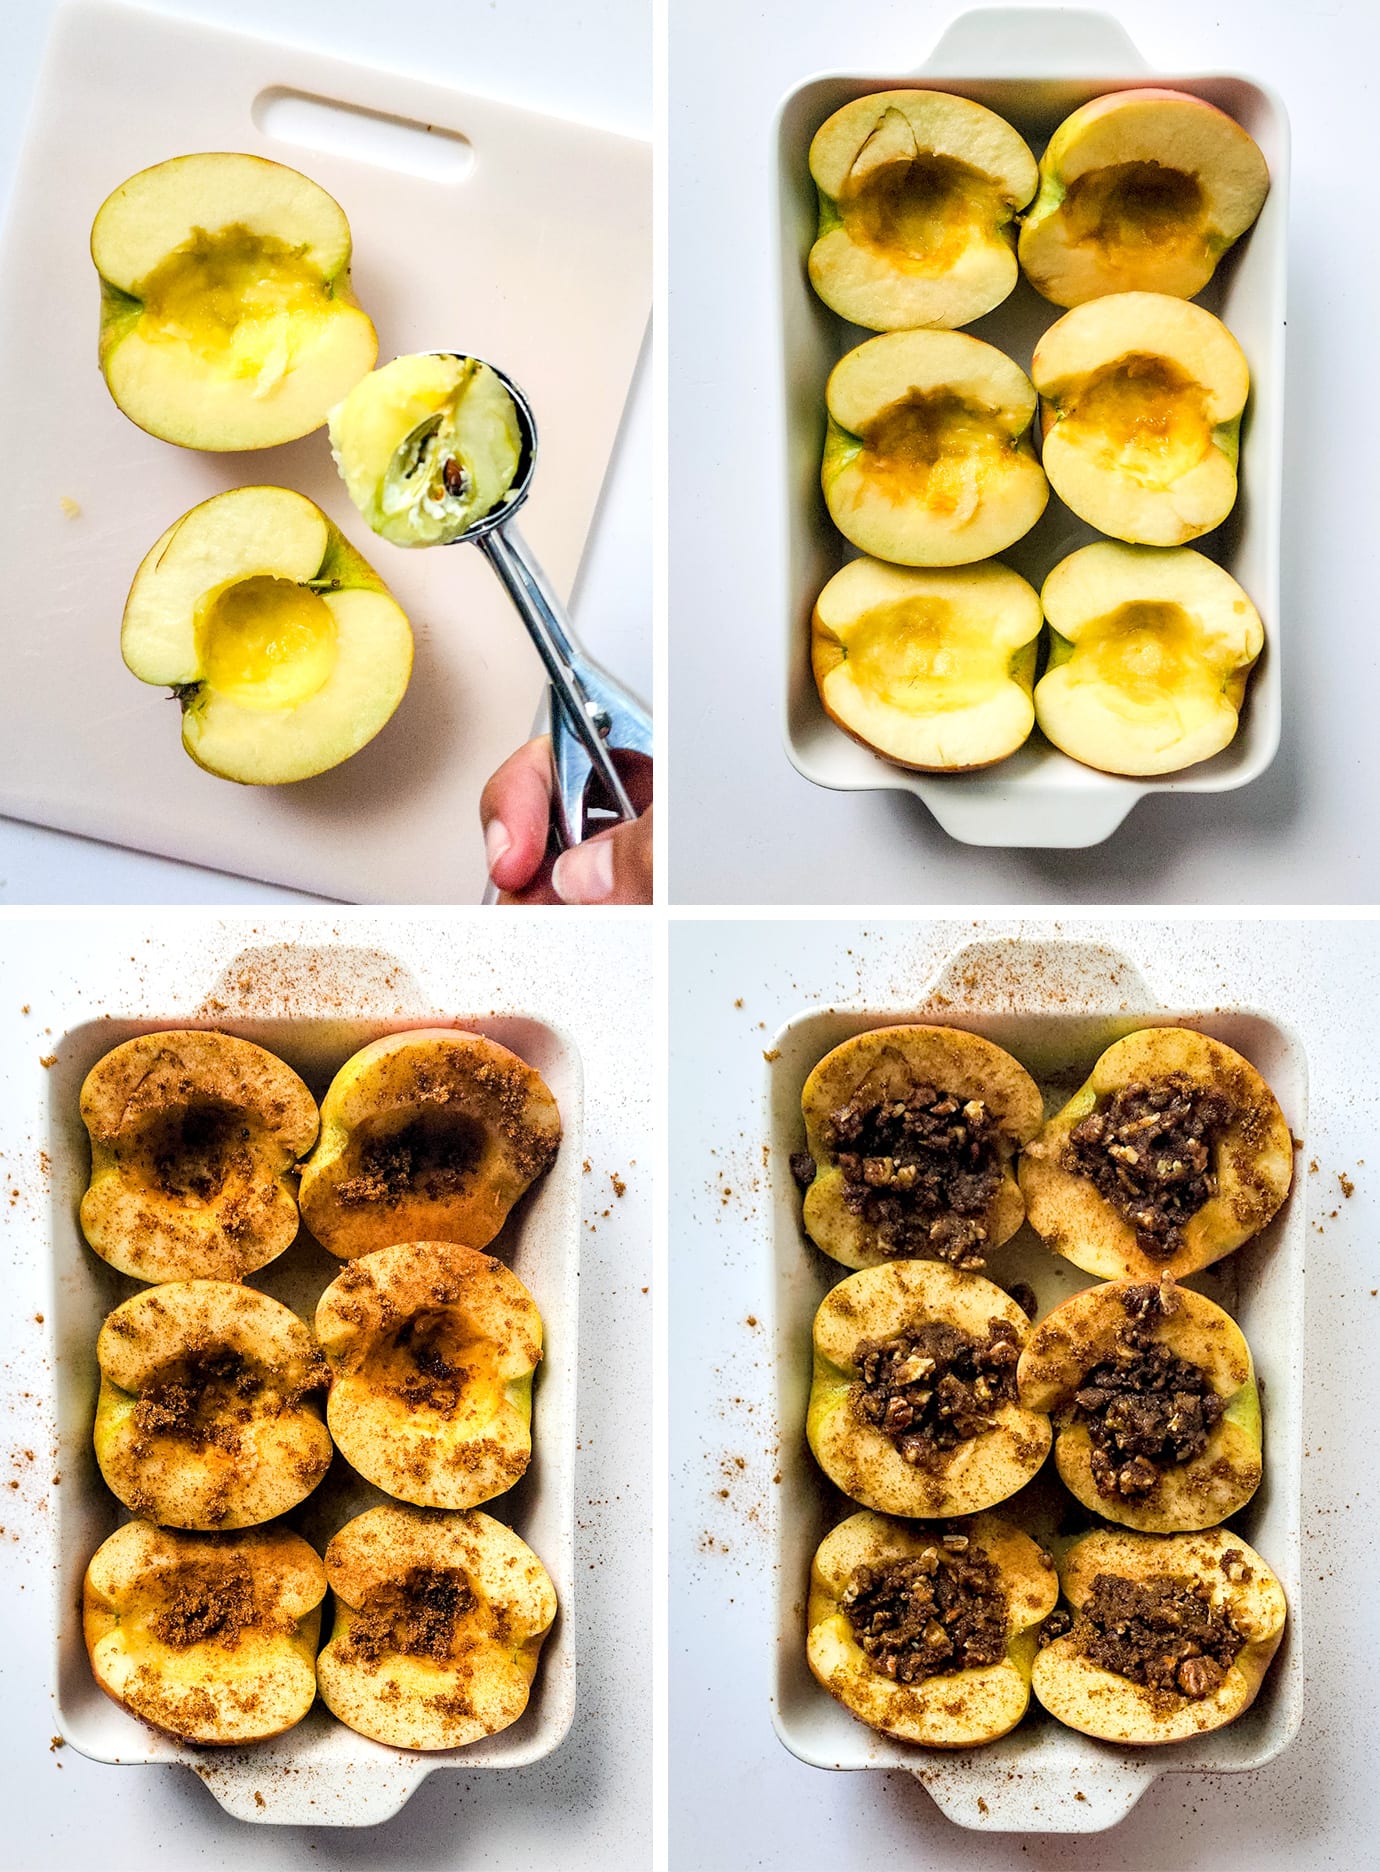 how to make baked cinnamon apples in the oven.